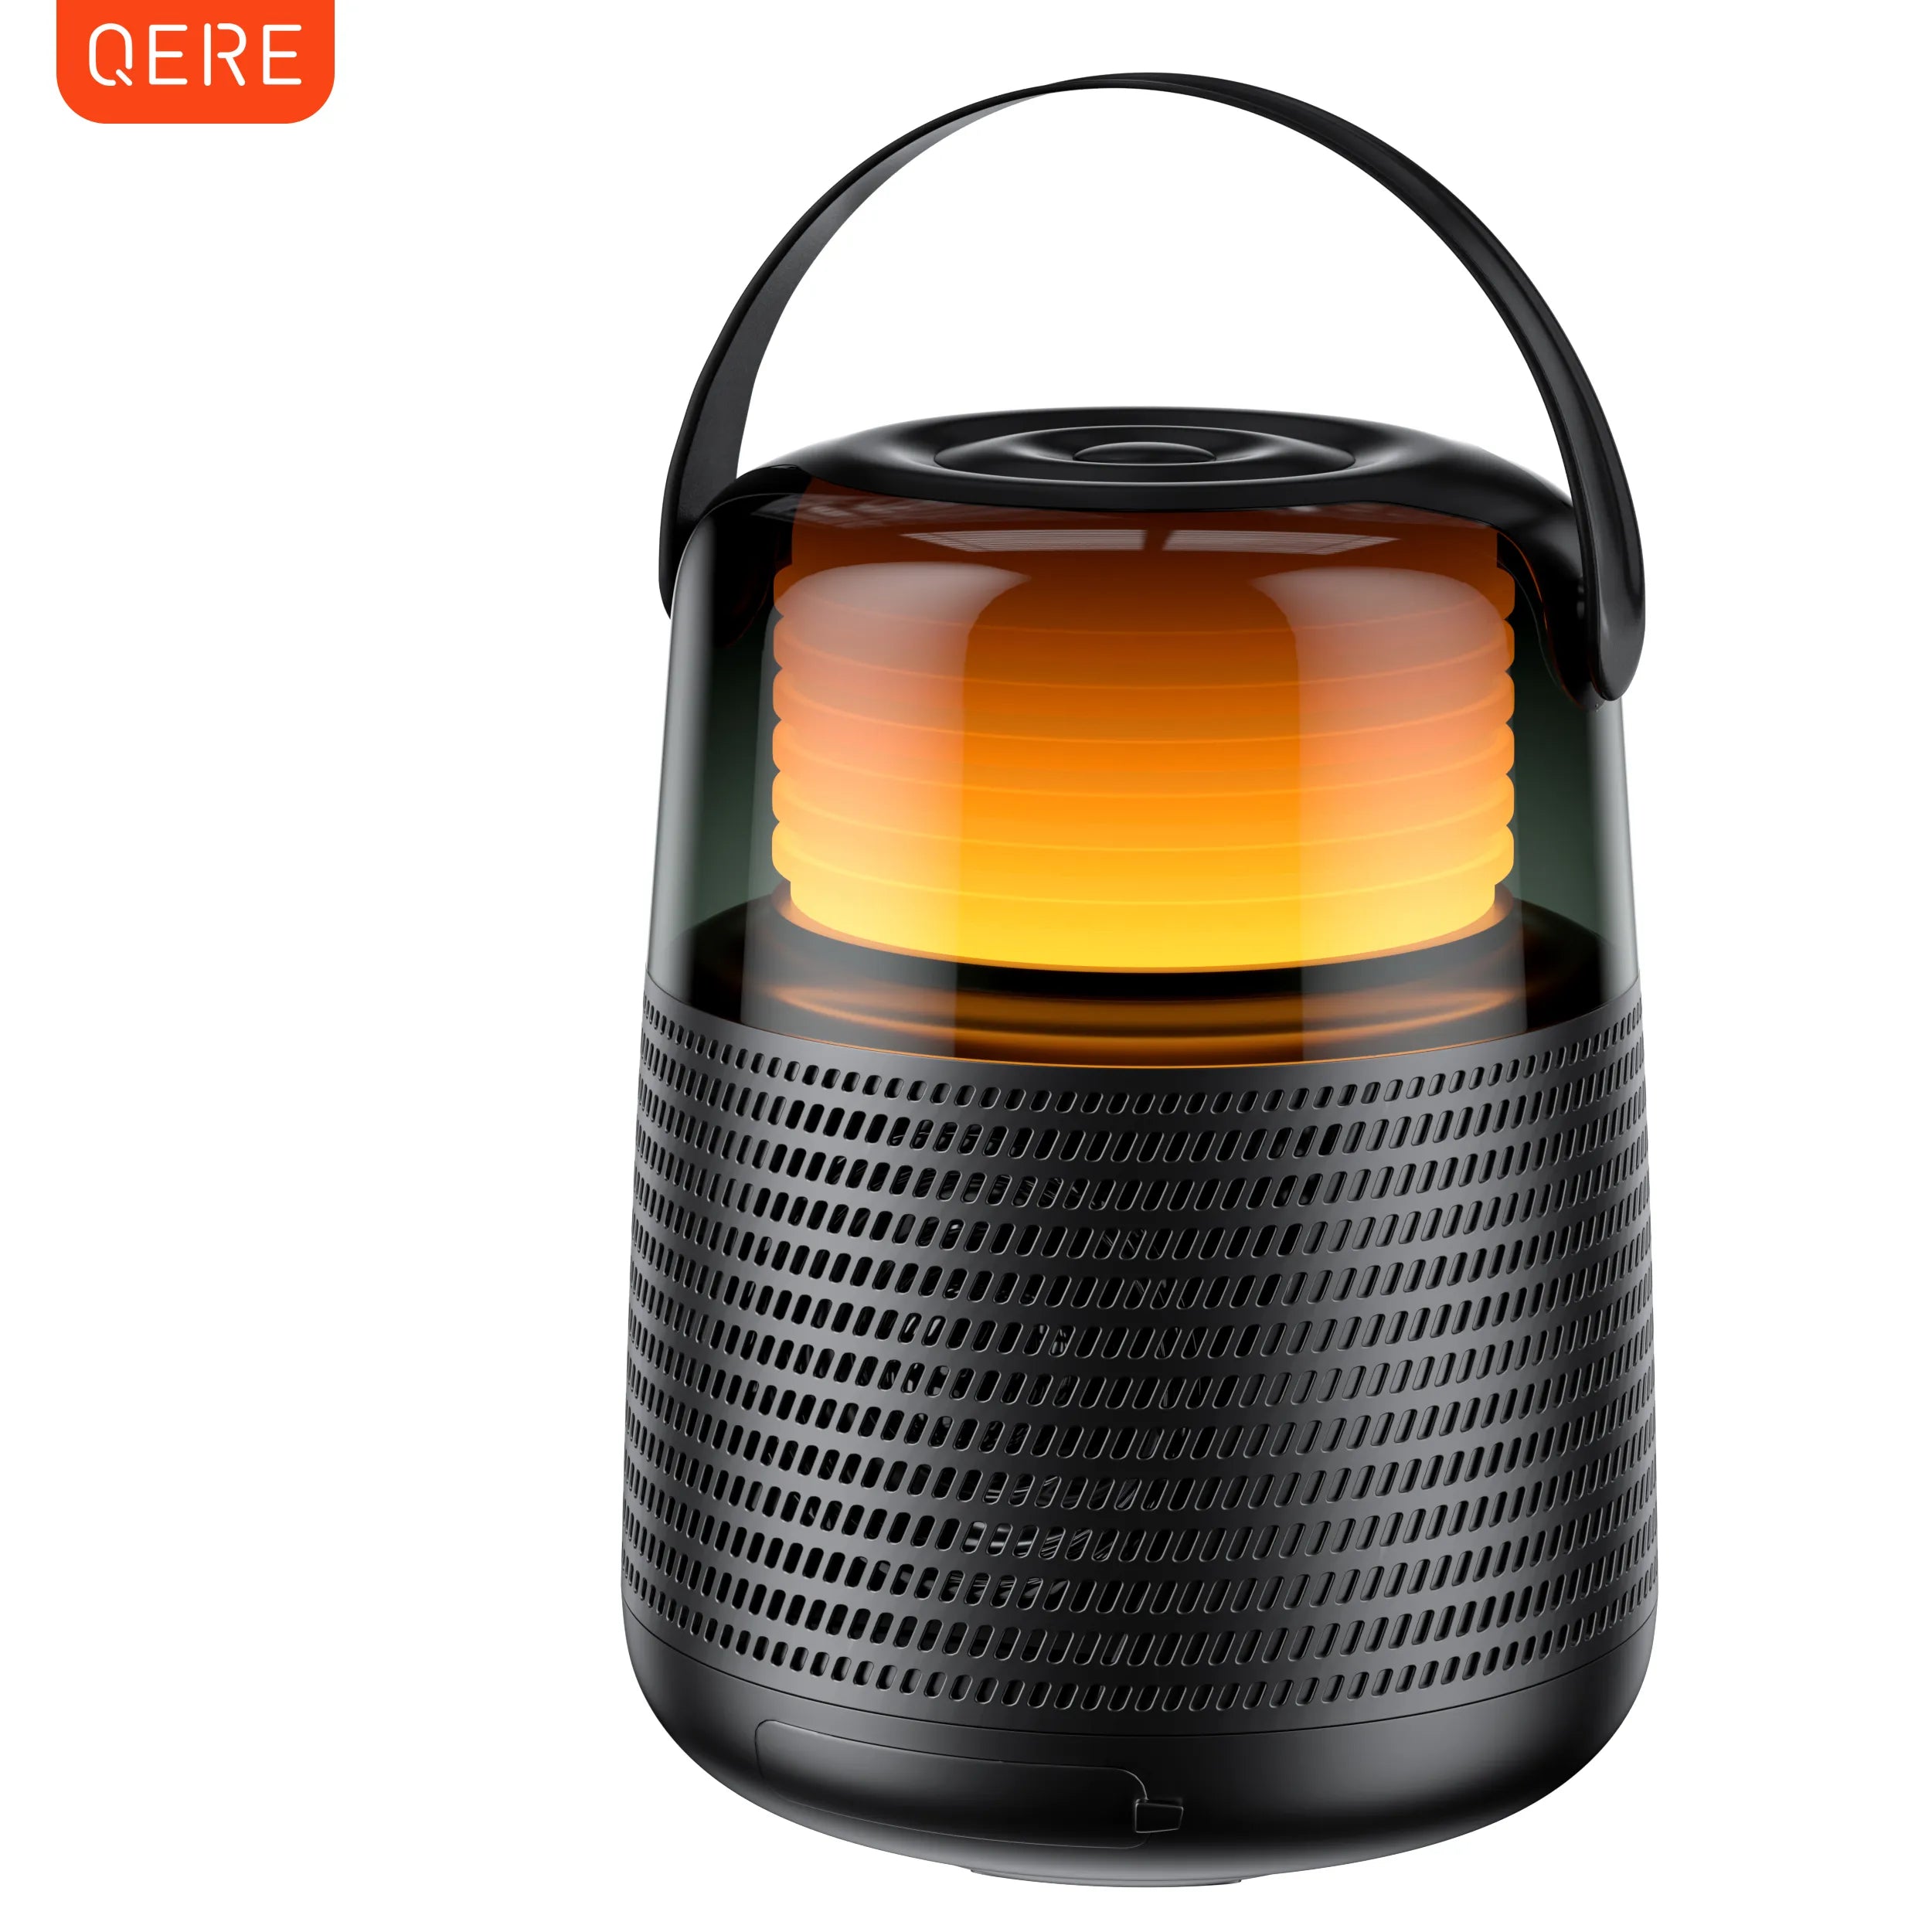 QERE HF55 Bluetooth Speaker with Hi-Res 20W Audio,Wireless HiFi Portable Speaker IPX5 Waterproof,Multiple connection modes,